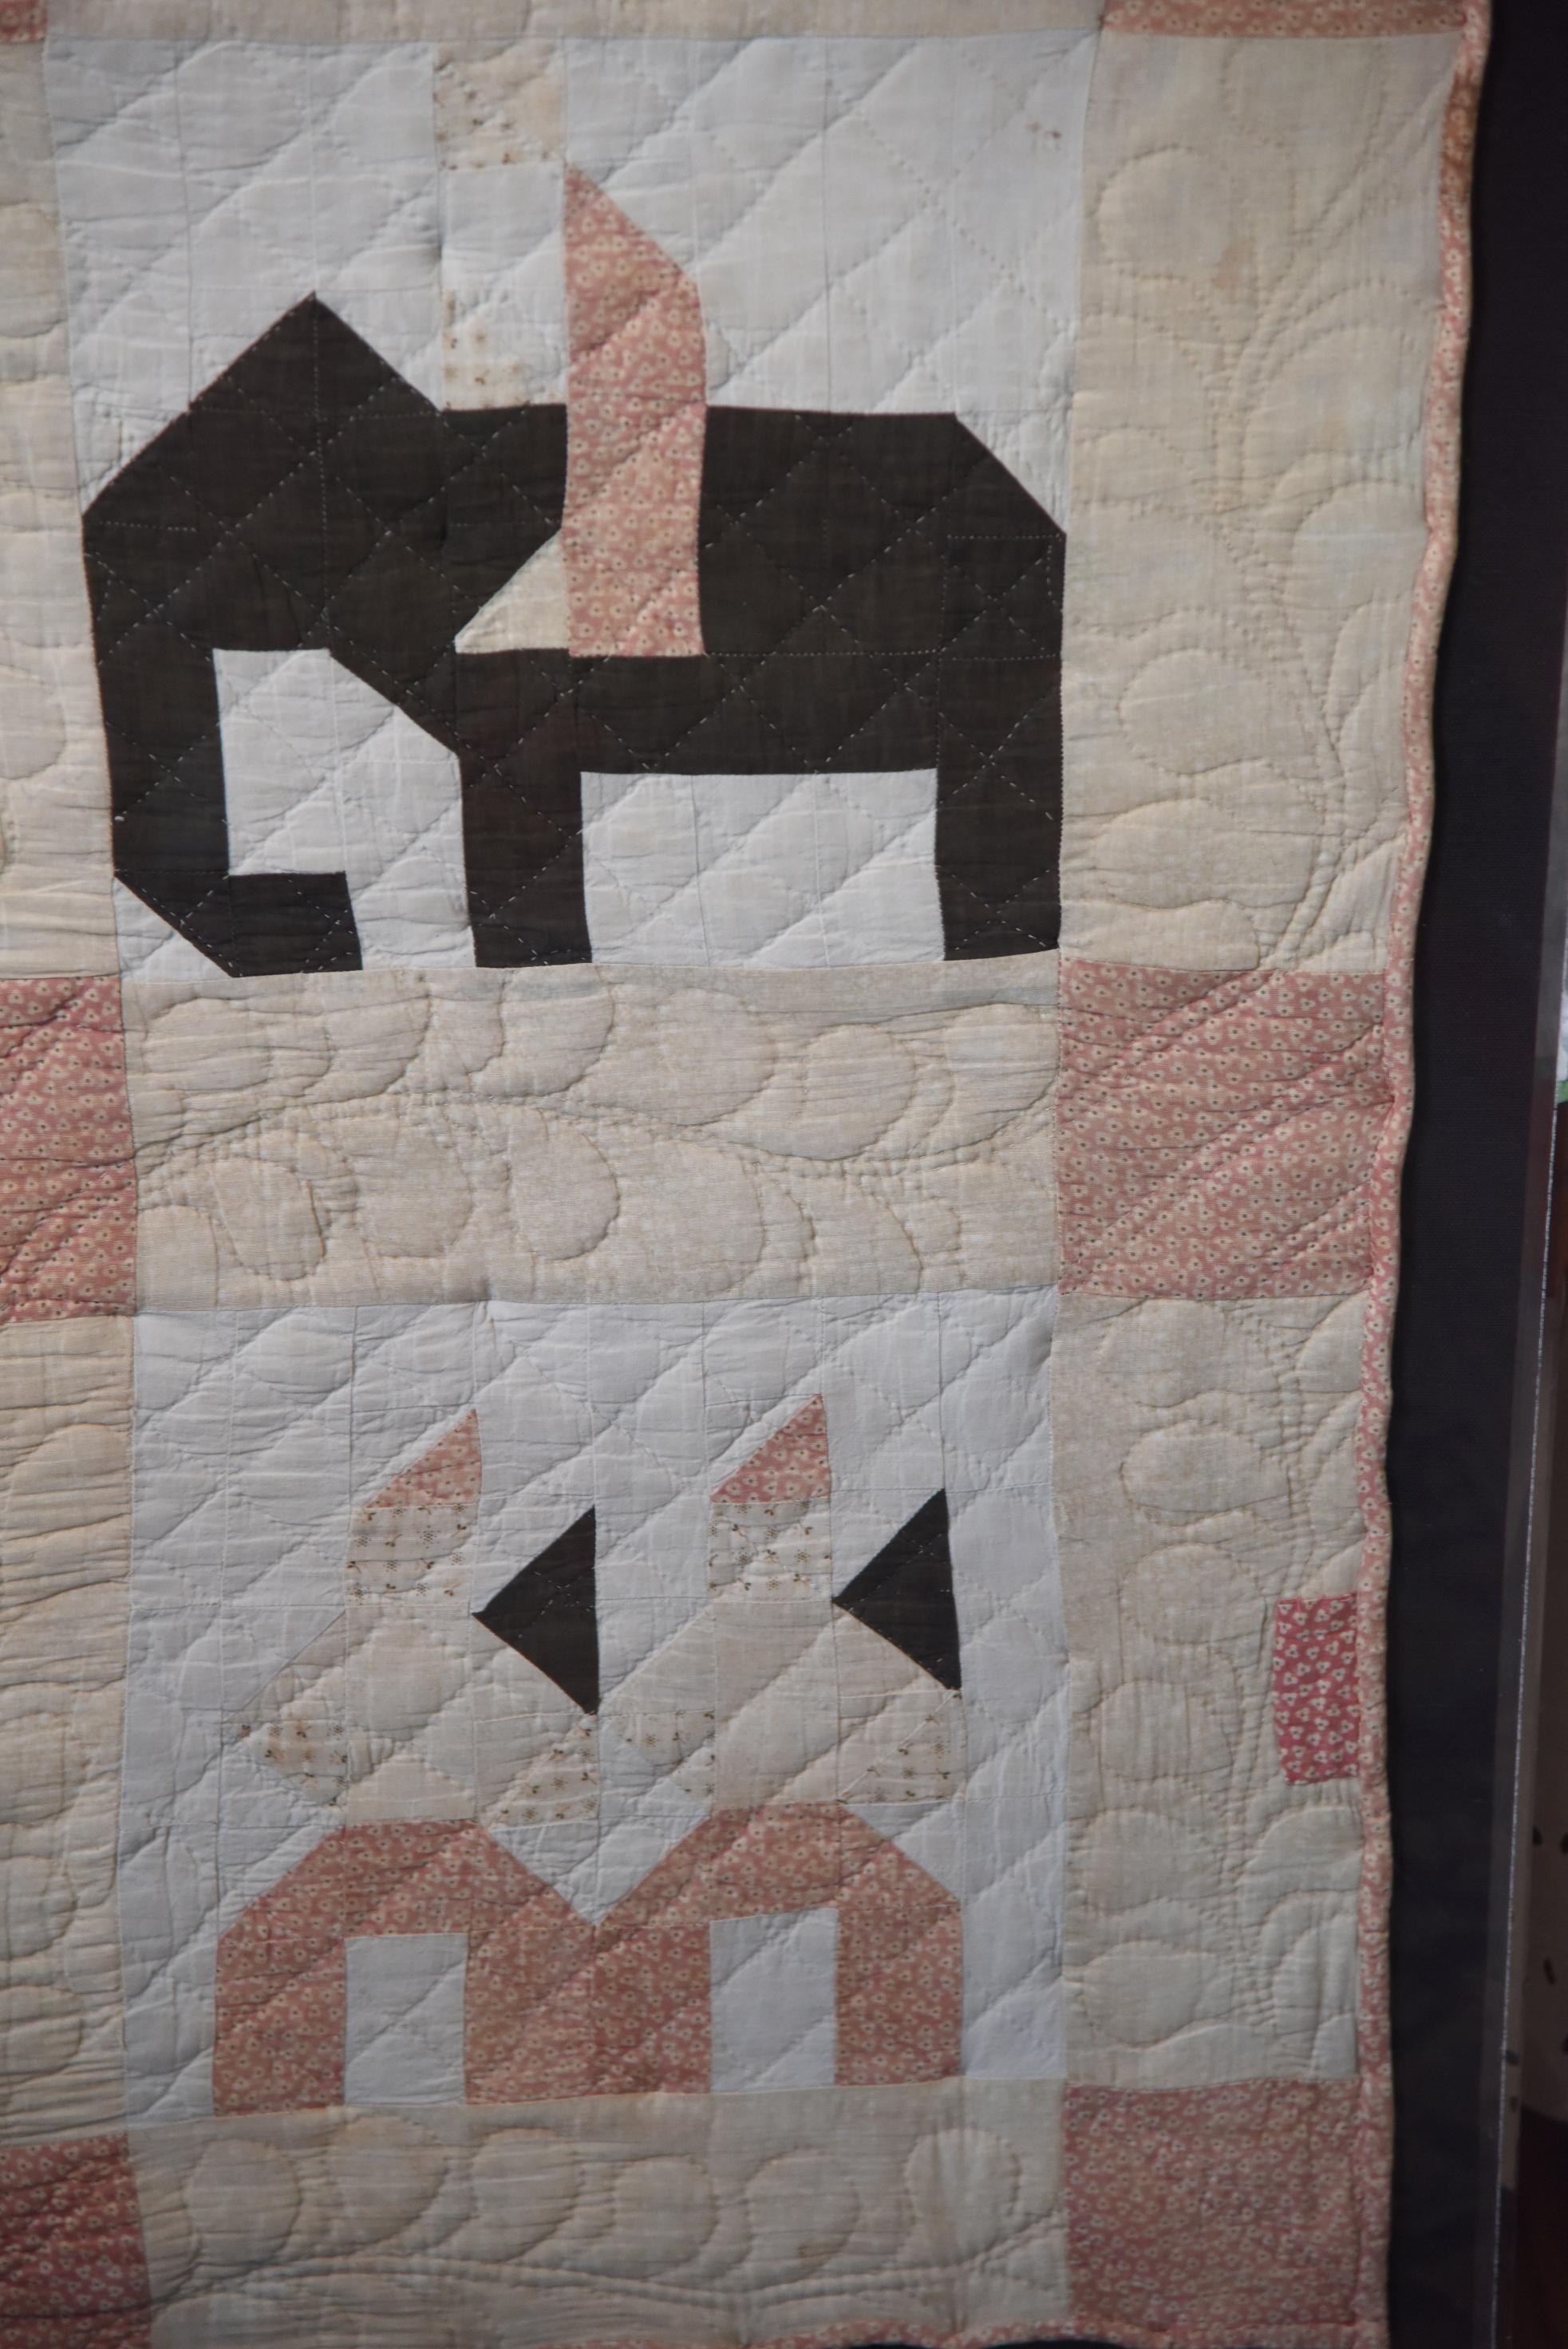 Lot #550A - American late 19th century figural applique and Pieced Crib Quilt in six 11” square